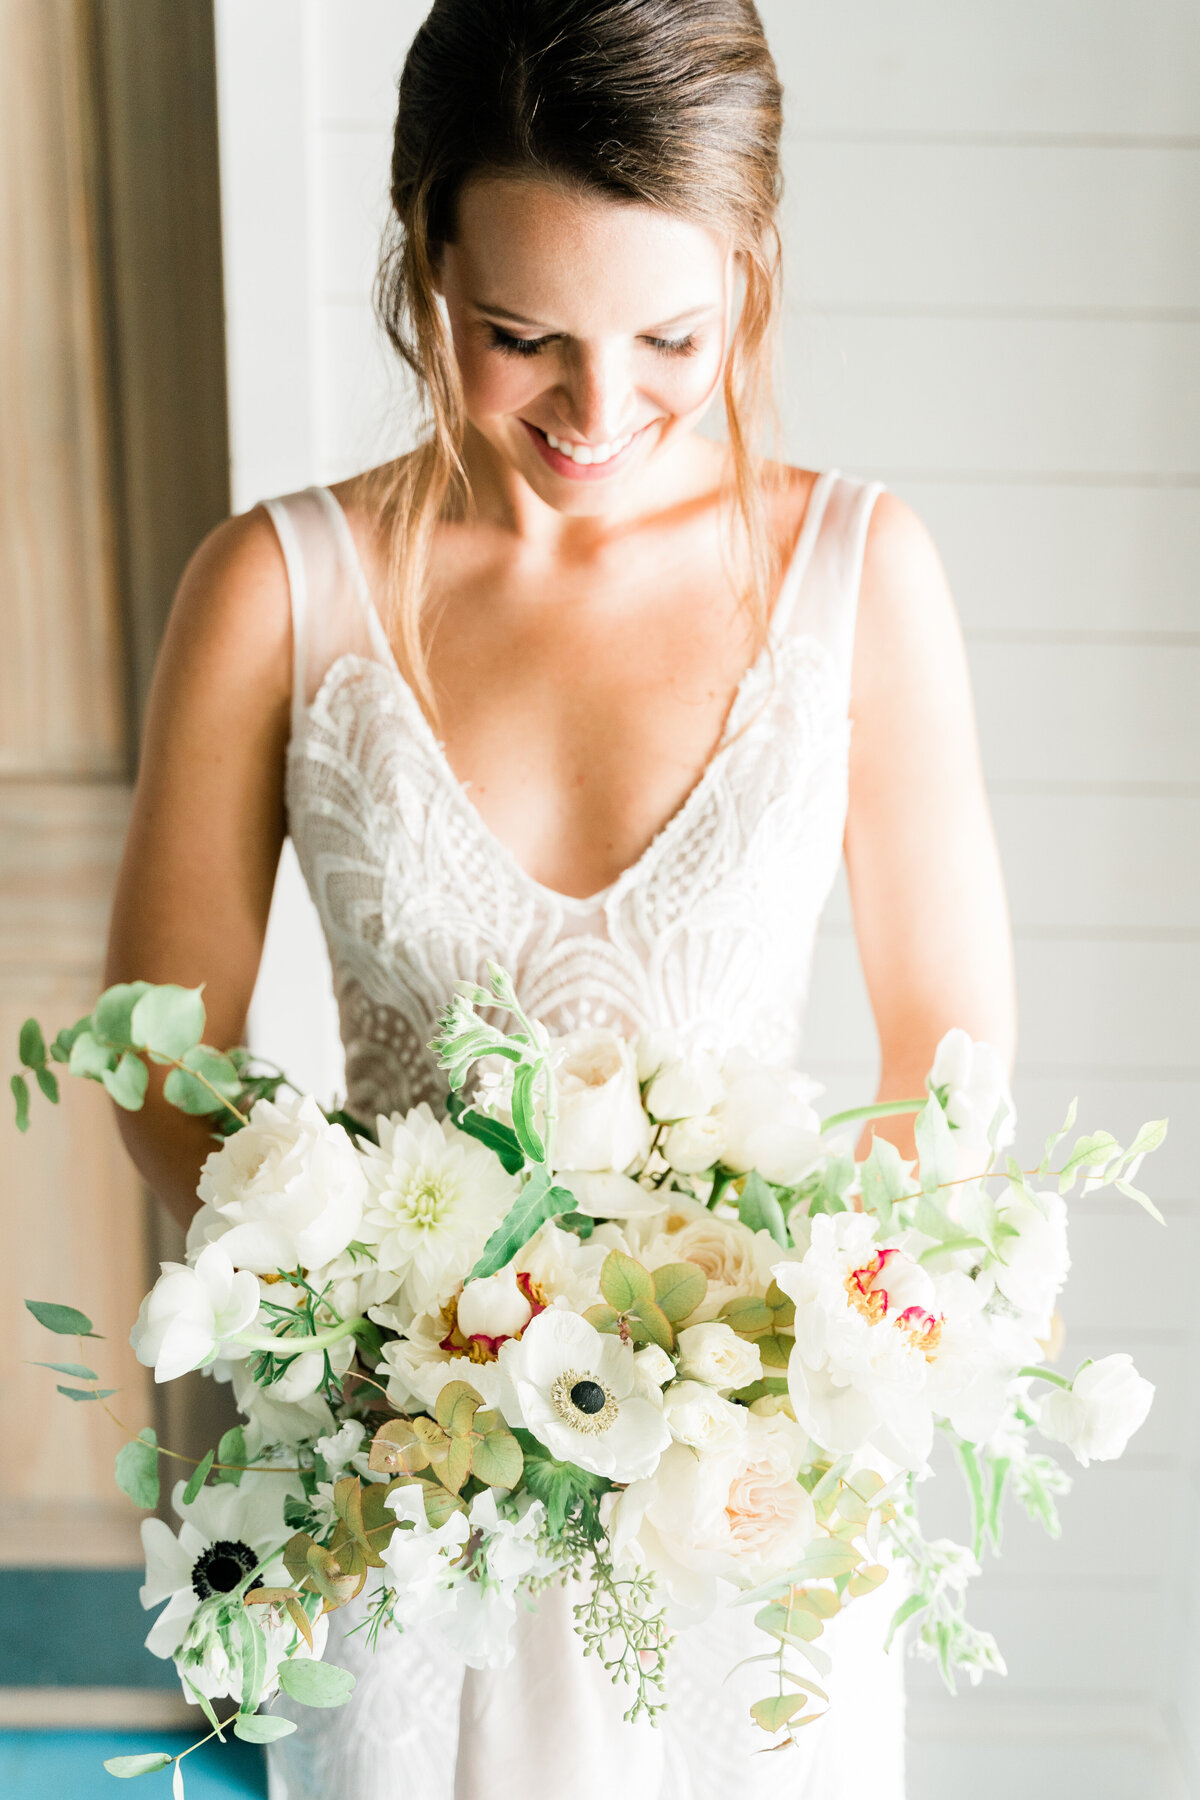 Bride looking at white bouquet